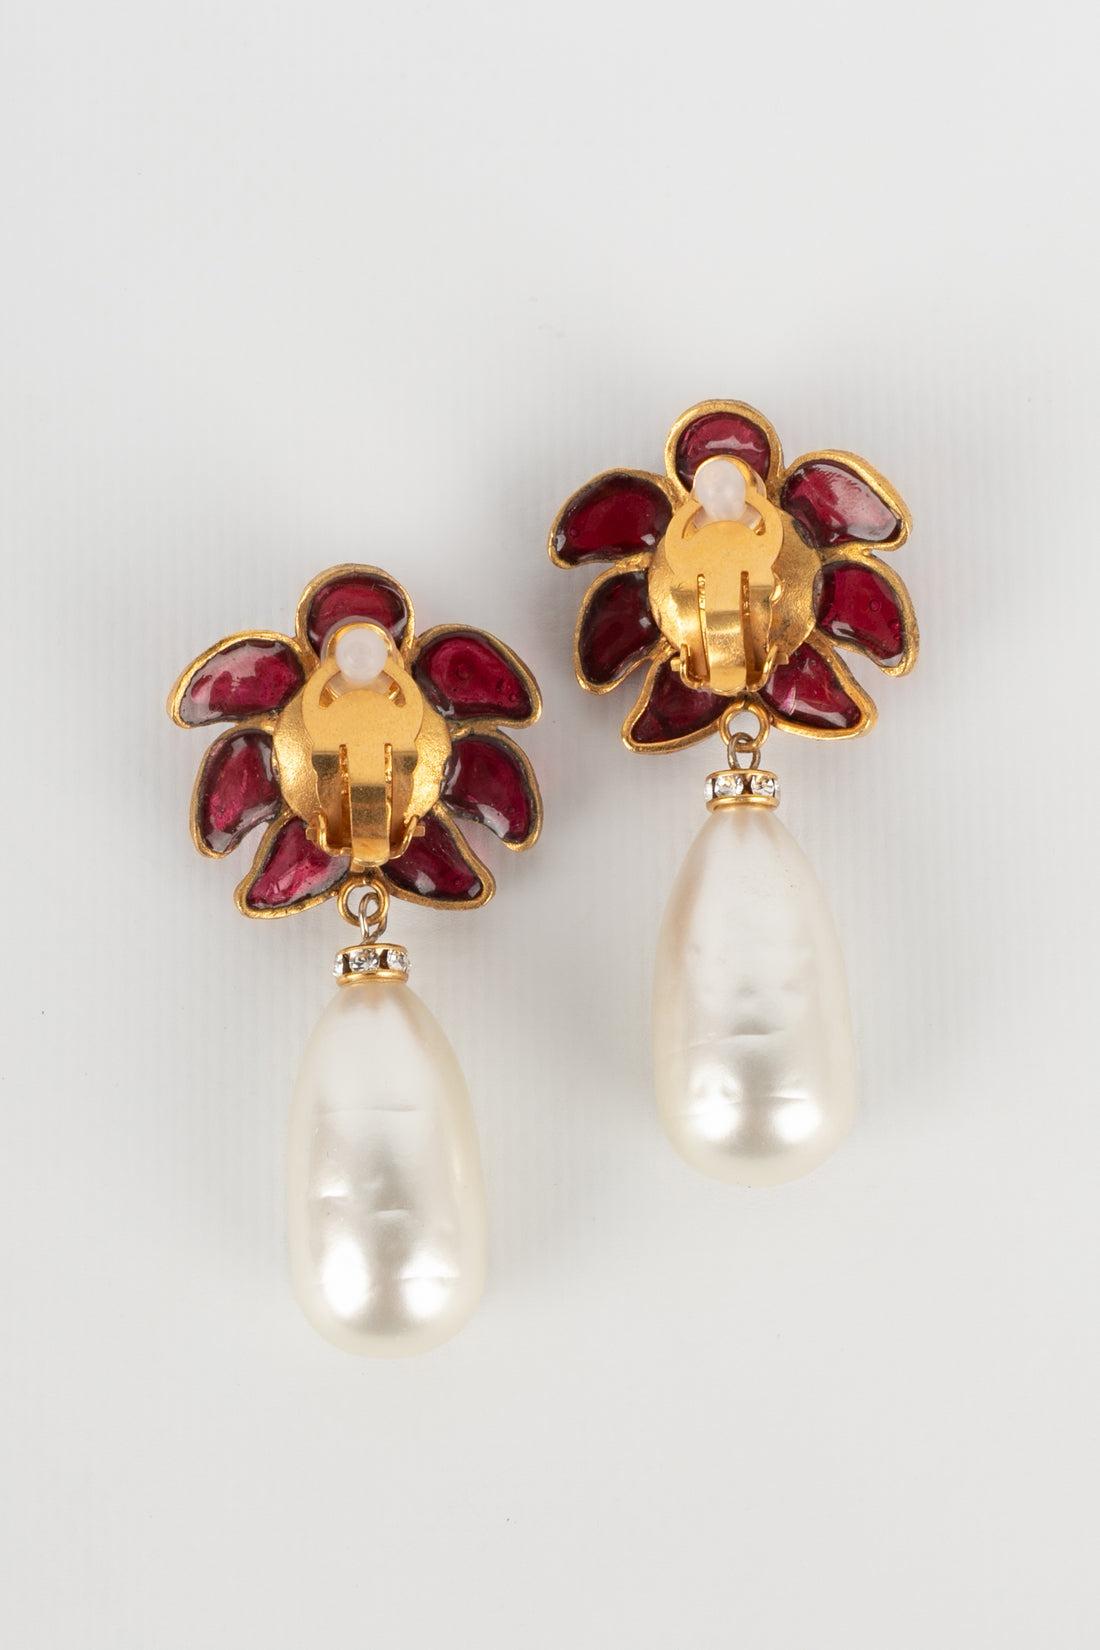 Chanel - (Made in France) Golden metal clip-on earrings with glass paste and costume pearl. Spring-Summer 1994 Collection.

Additional information:
Condition: Very good condition
Dimensions: Height: 6 cm
Period: 20th Century

Seller Reference: